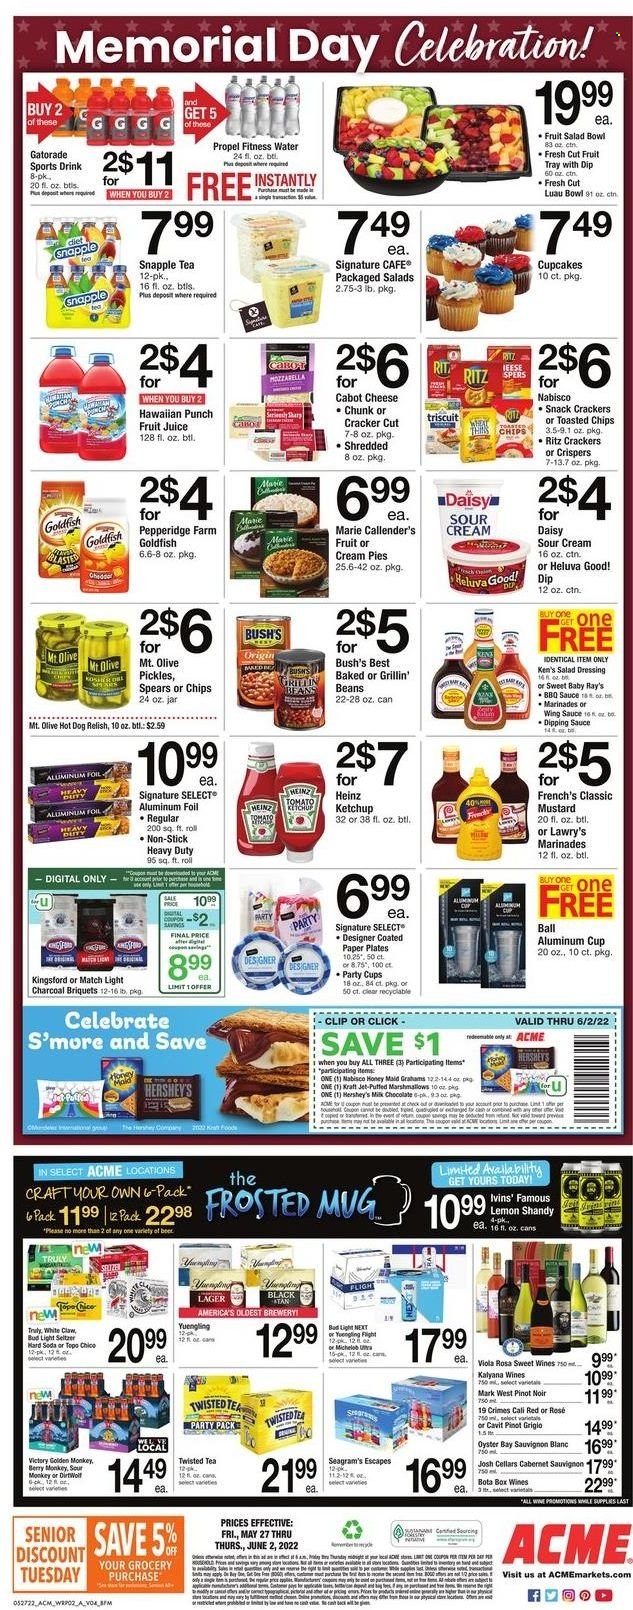 thumbnail - ACME Flyer - 05/27/2022 - 06/02/2022 - Sales products - cupcake, cream pie, beans, oysters, hot dog, sauce, Marie Callender's, Kraft®, mozzarella, sour cream, dip, Hershey's, marshmallows, milk chocolate, chocolate, snack, Celebration, crackers, RITZ, chips, Goldfish, Heinz, fruit salad, Honey Maid, BBQ sauce, mustard, salad dressing, ketchup, dressing, wing sauce, juice, fruit juice, Snapple, Gatorade, tea, Cabernet Sauvignon, white wine, Pinot Noir, Pinot Grigio, Sauvignon Blanc, rosé wine, White Claw, Hard Seltzer, TRULY, beer, Bud Light, Lager, Victory Golden, Jet, mug, plate, cup, salad bowl, aluminium foil, Sharp, paper, paper plate, party cups, toaster, monkey, Twisted Tea. Page 2.